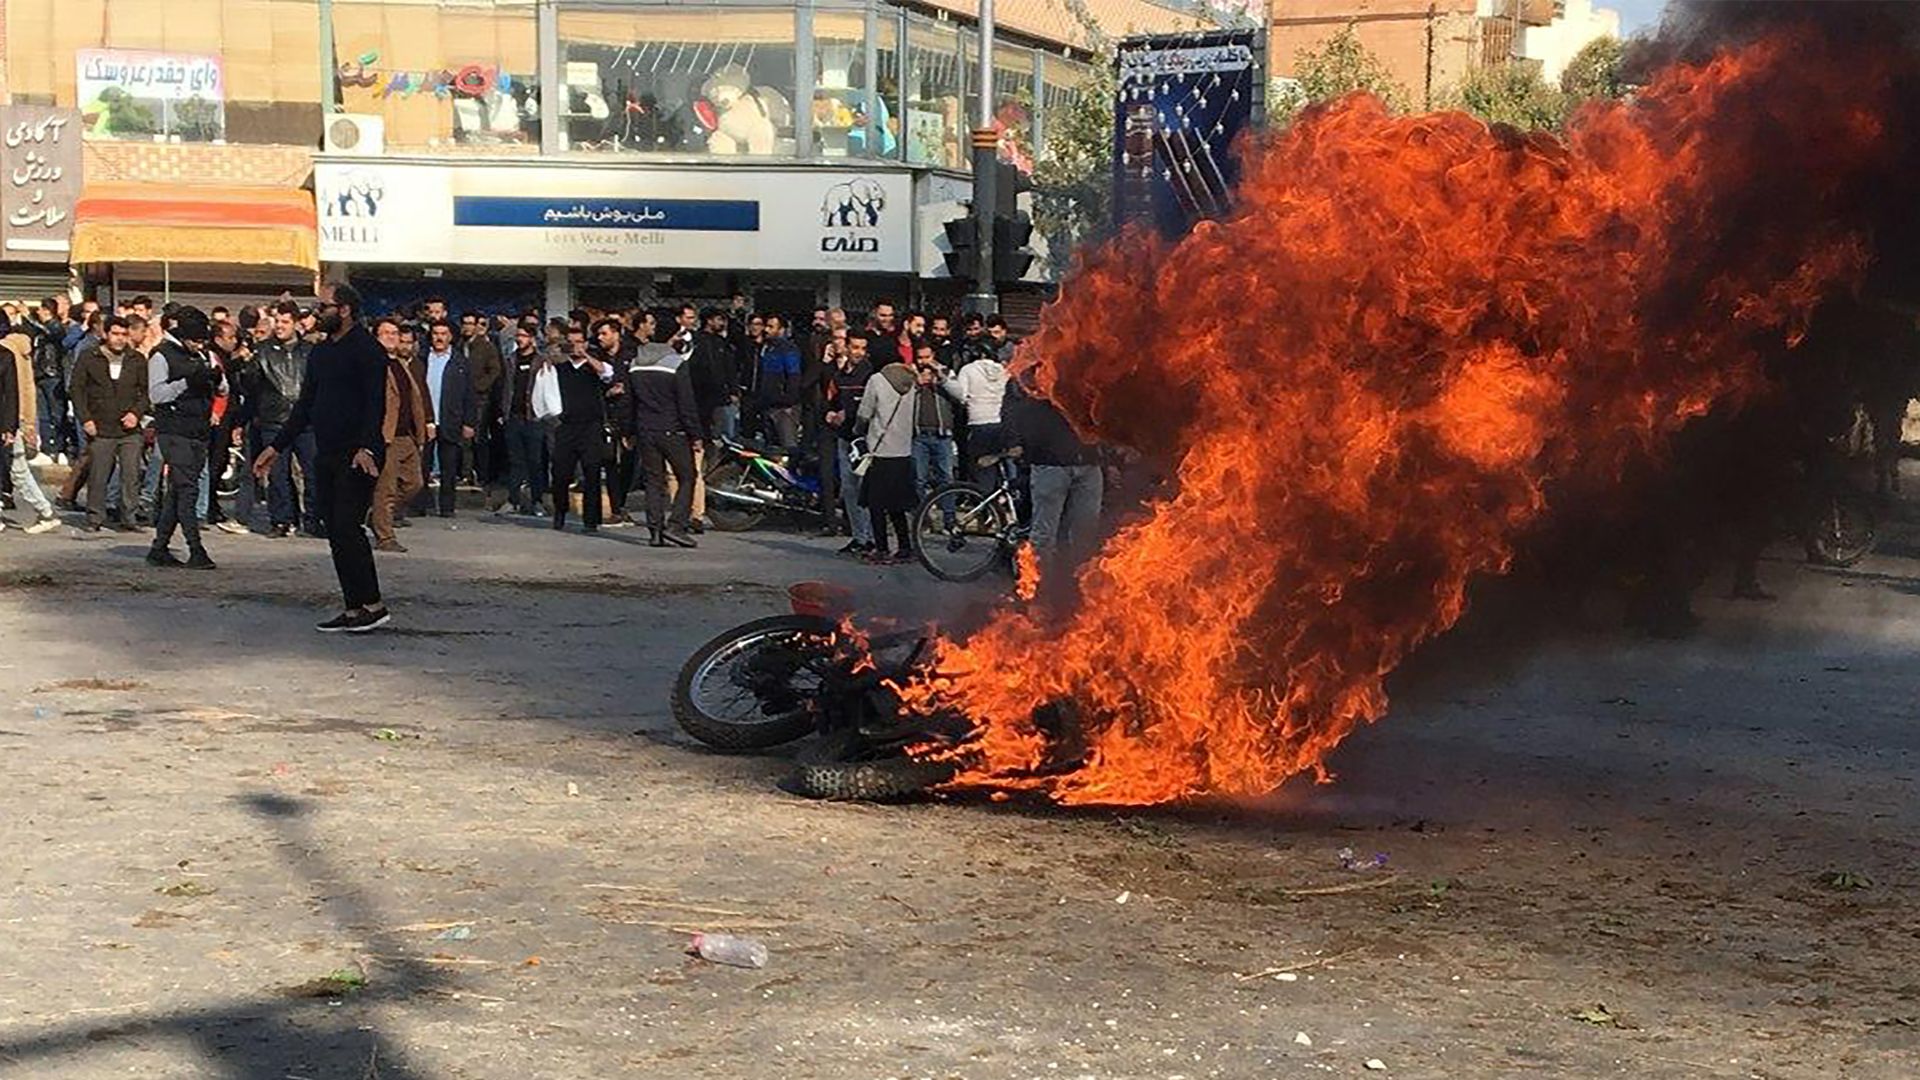 protestors surround a burning motorcycle in a street intersection